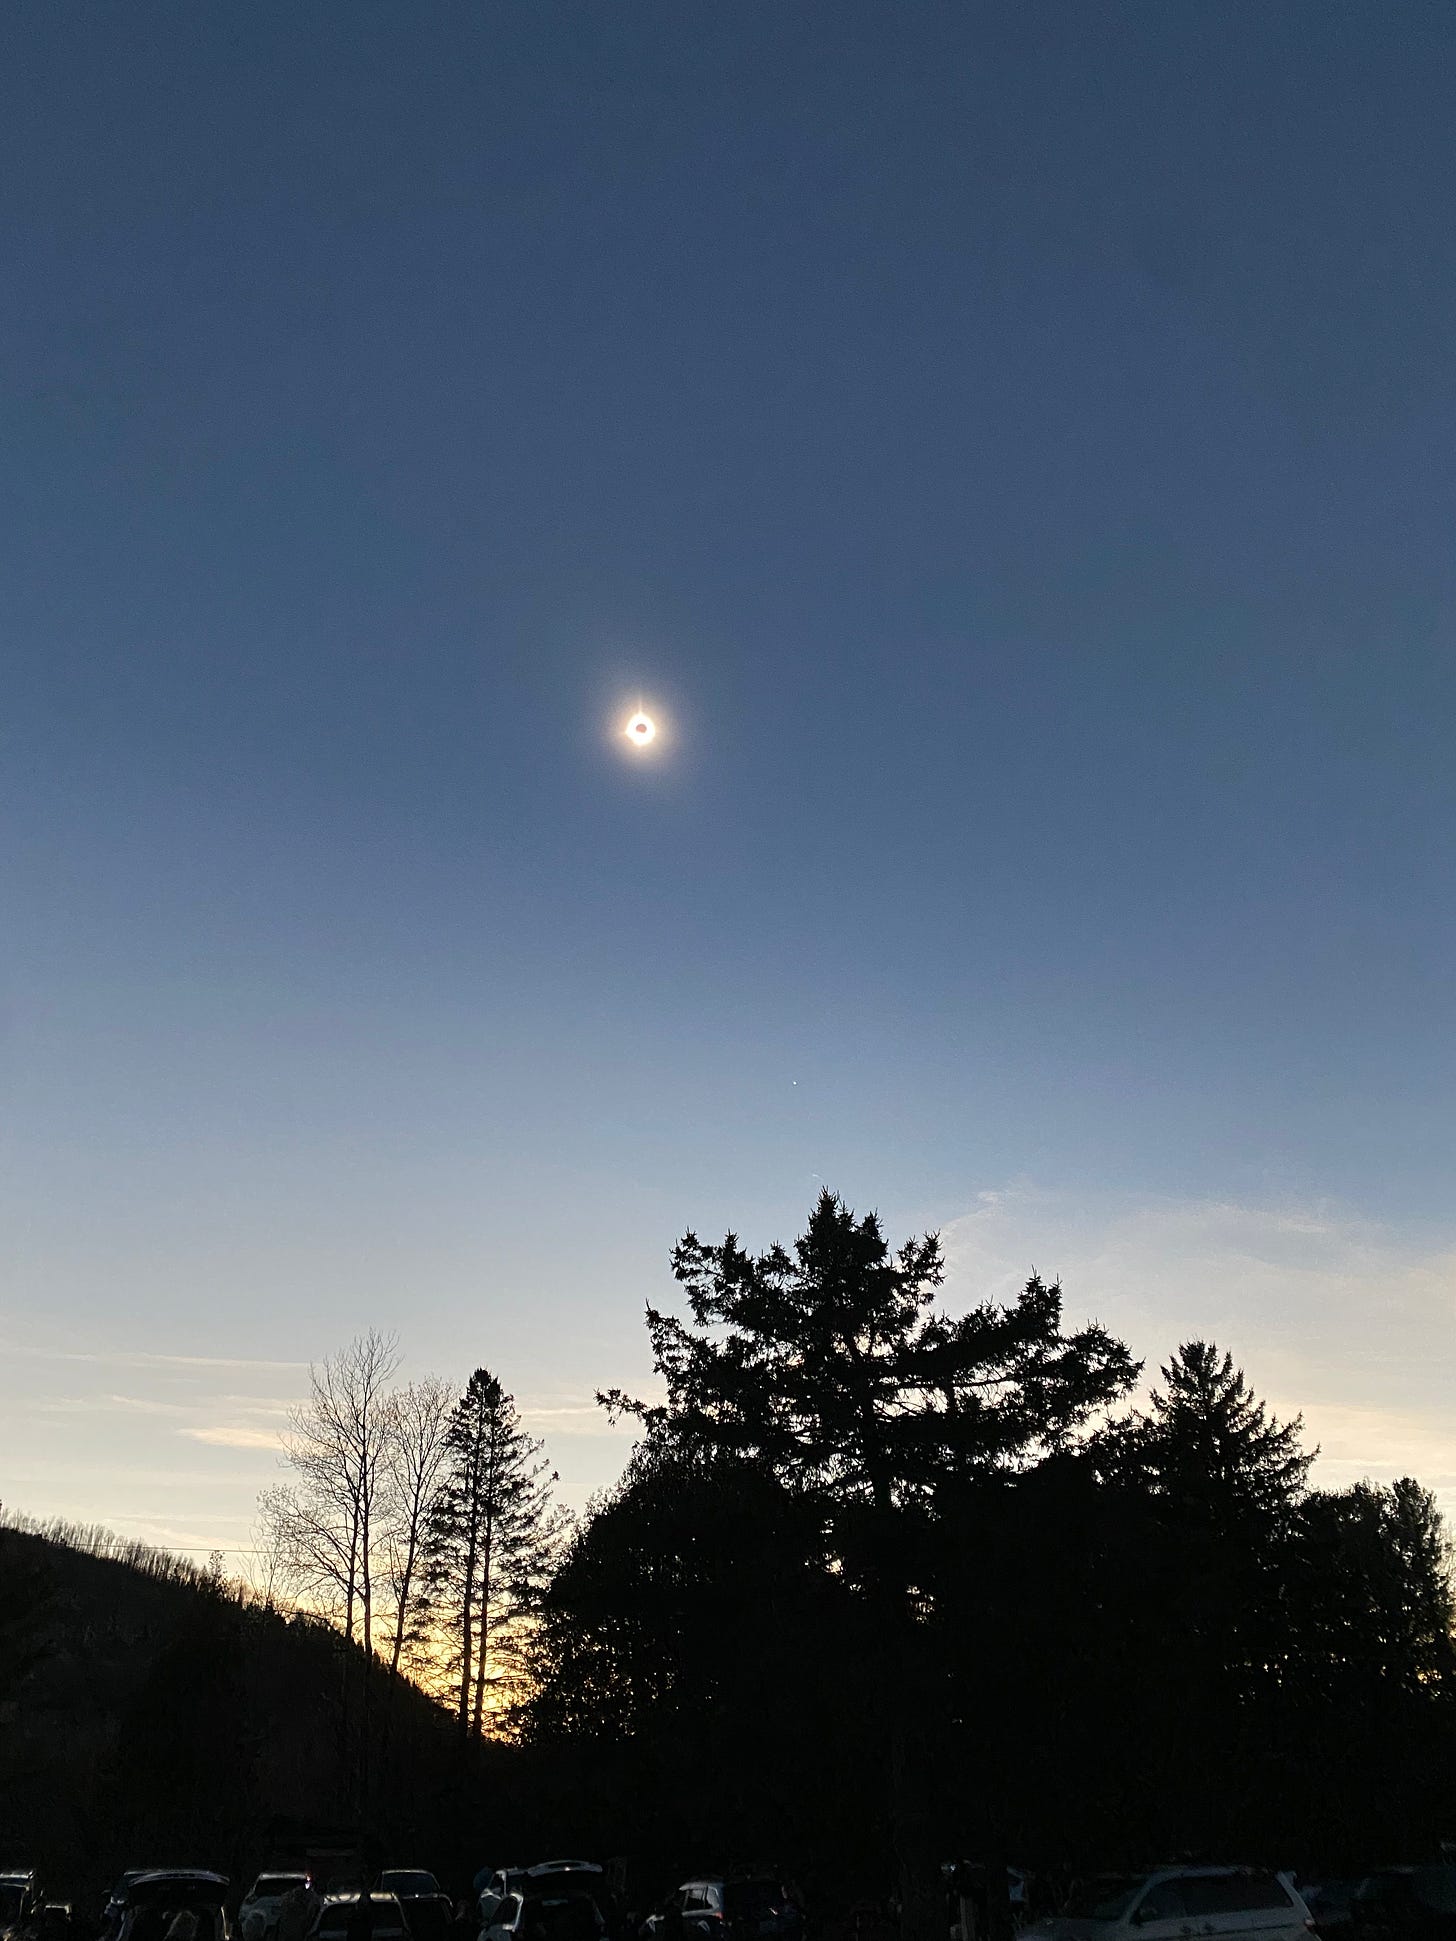 The sky at totality: the sun is a tiny gold speck with a dark dot in the middle; the sky is a deep blue with pale gold and light blue on the horizon; the trees and hillside in the foreground are silhouetted black.  